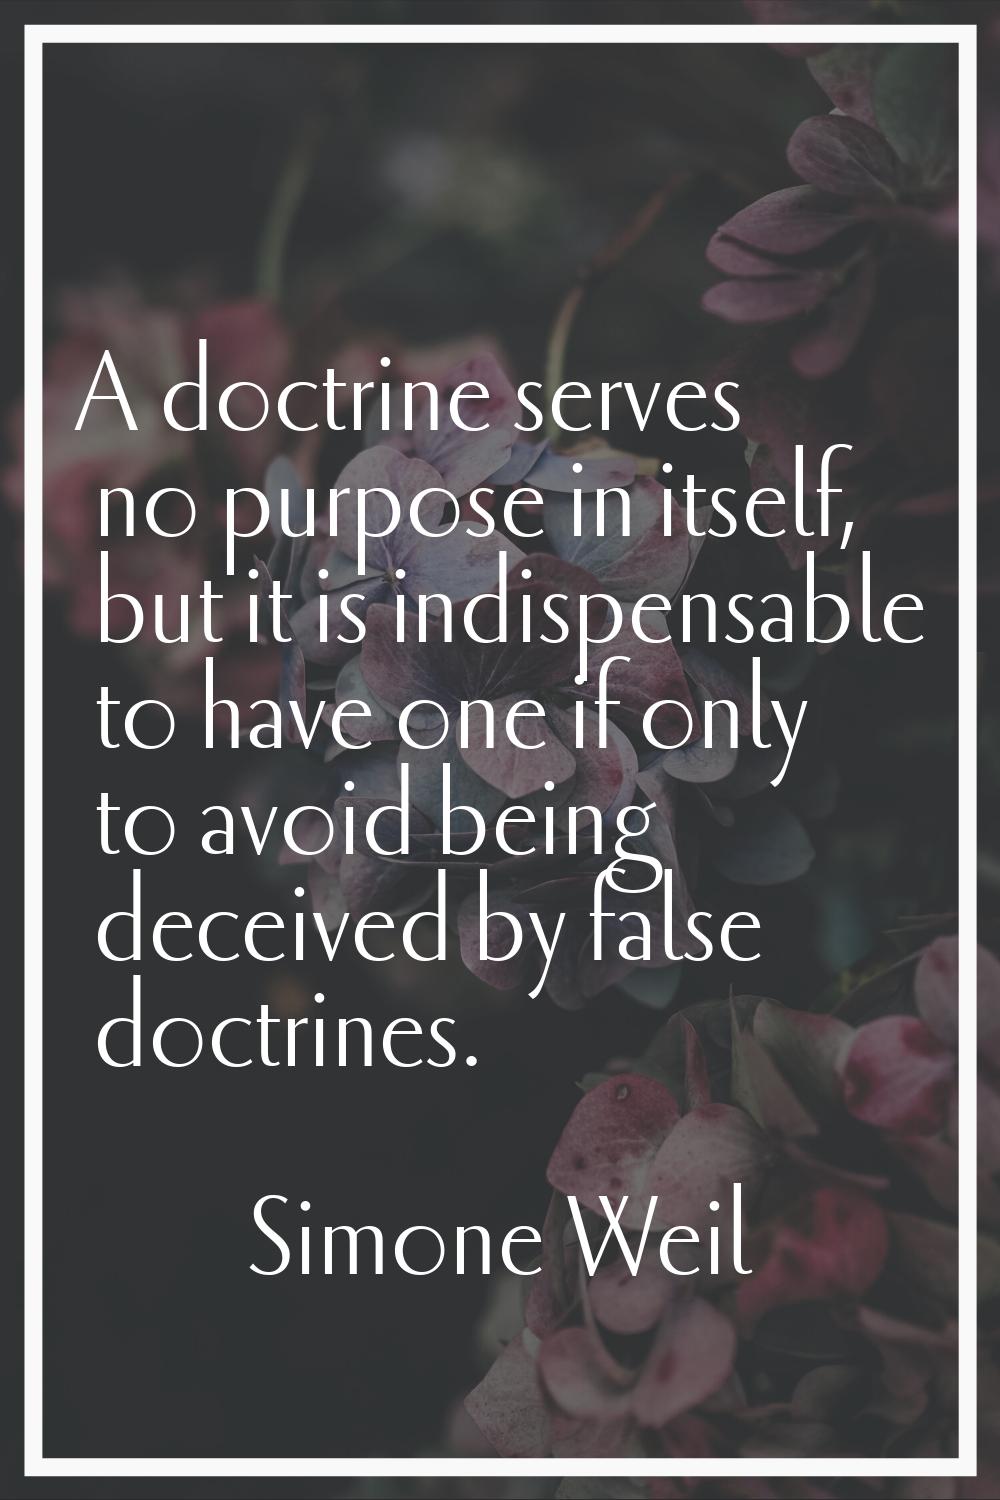 A doctrine serves no purpose in itself, but it is indispensable to have one if only to avoid being 